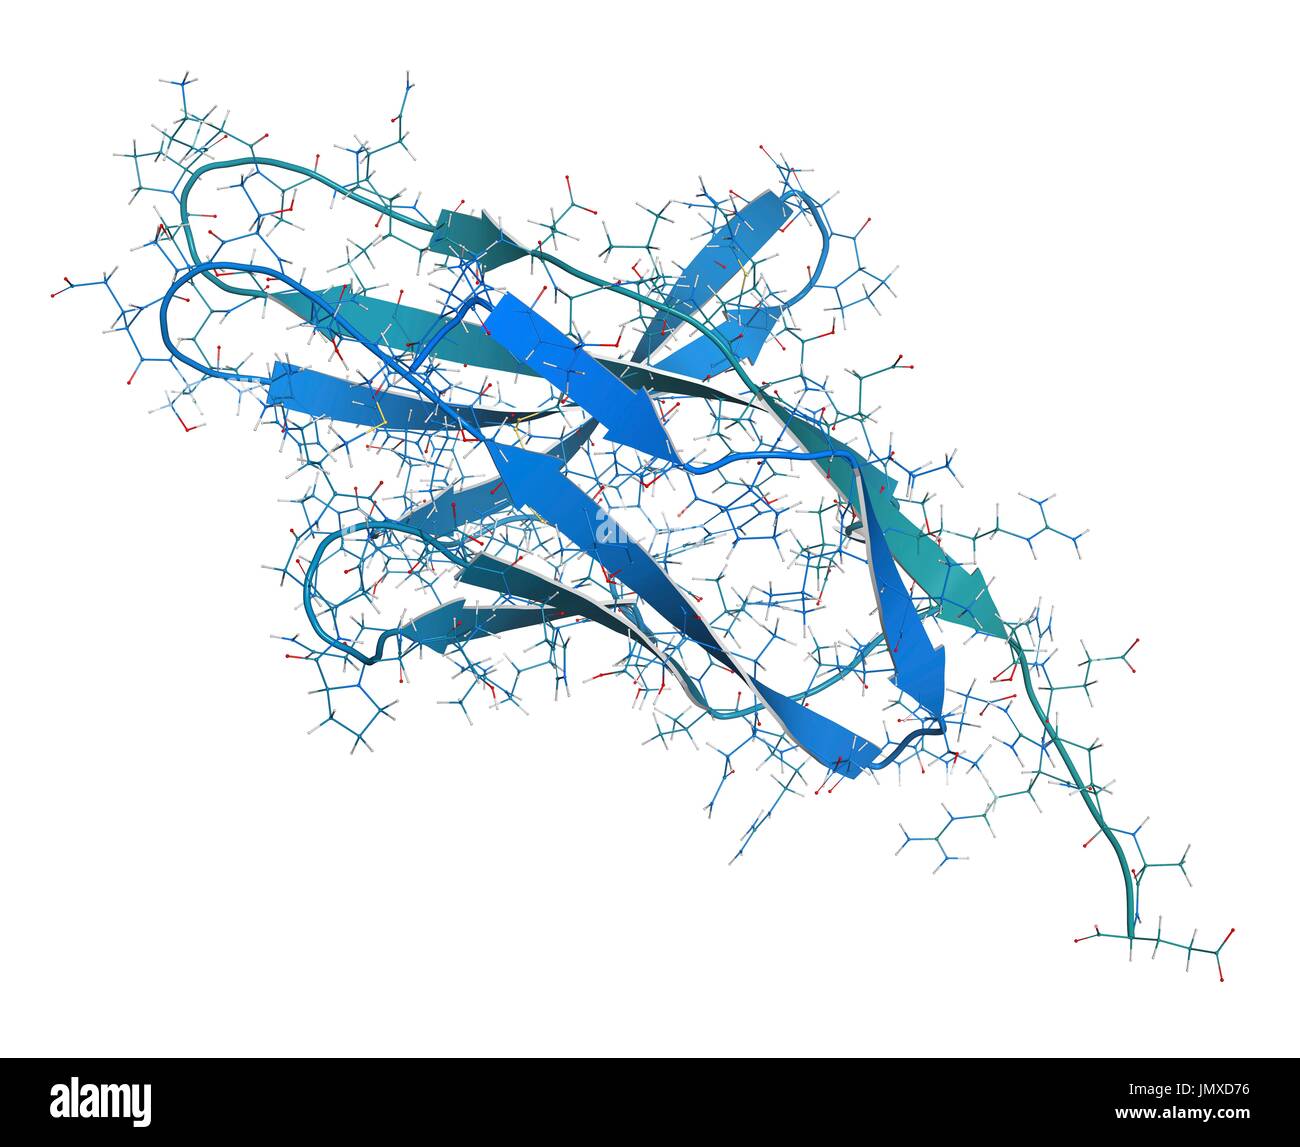 Programmed cell death 1 (PD-1, CD279) receptor protein. PD-1 is a major cancer drug target. Combined wireframe and cartoon model. Cartoon and carbon atoms: backbone gradient colouring (blue-teal); other atoms: conventional colour coding. Stock Photo